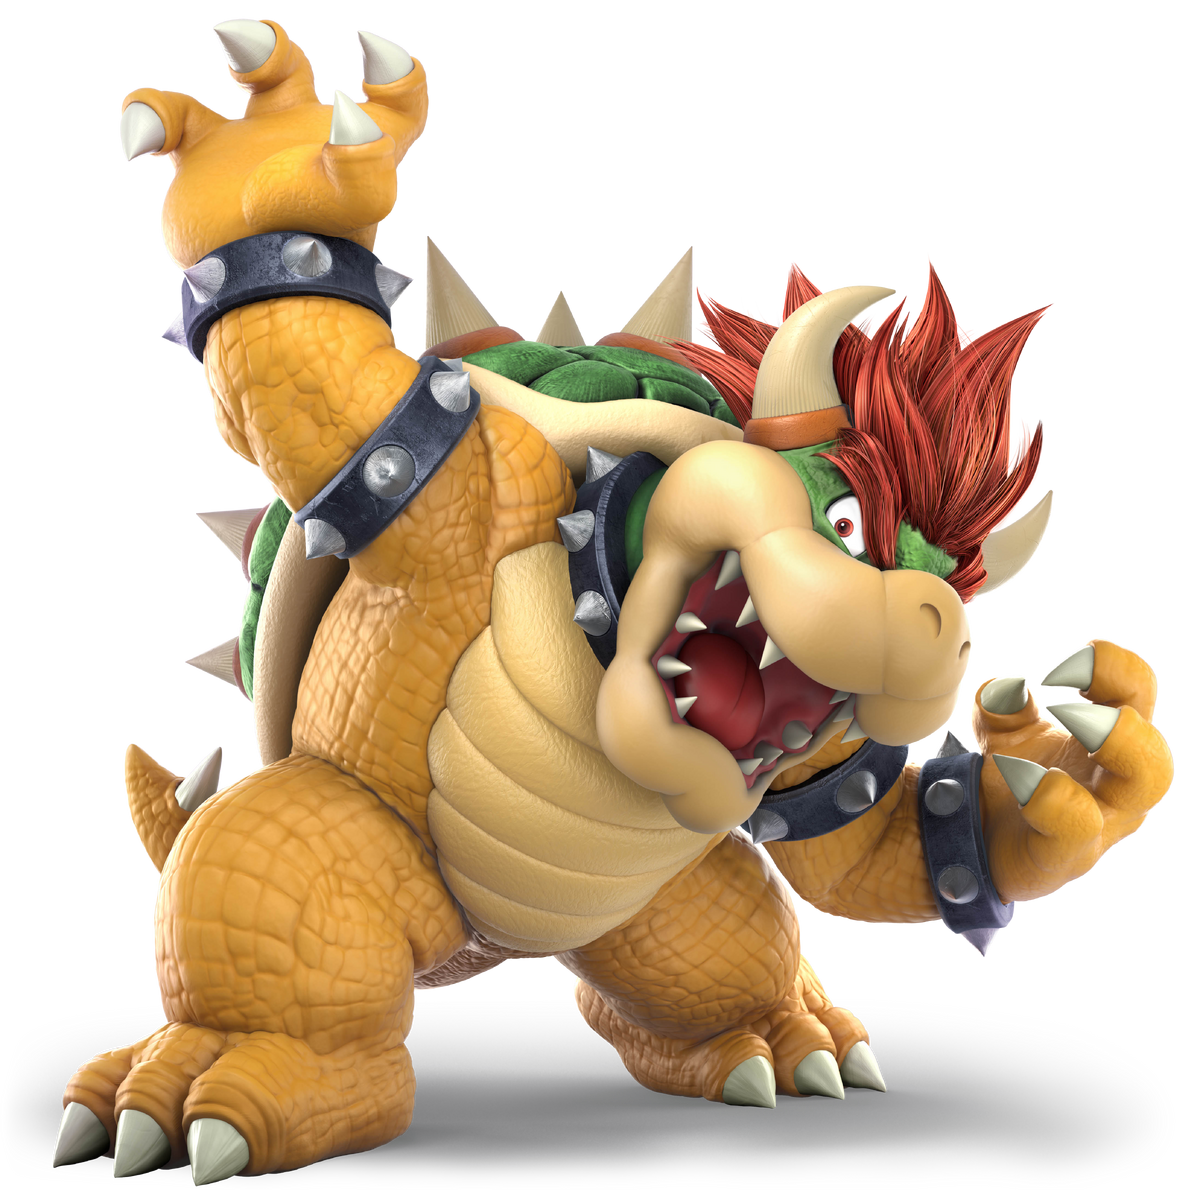 Super Mario's Bowser Should Be The Solo Protagonist of a Future Game